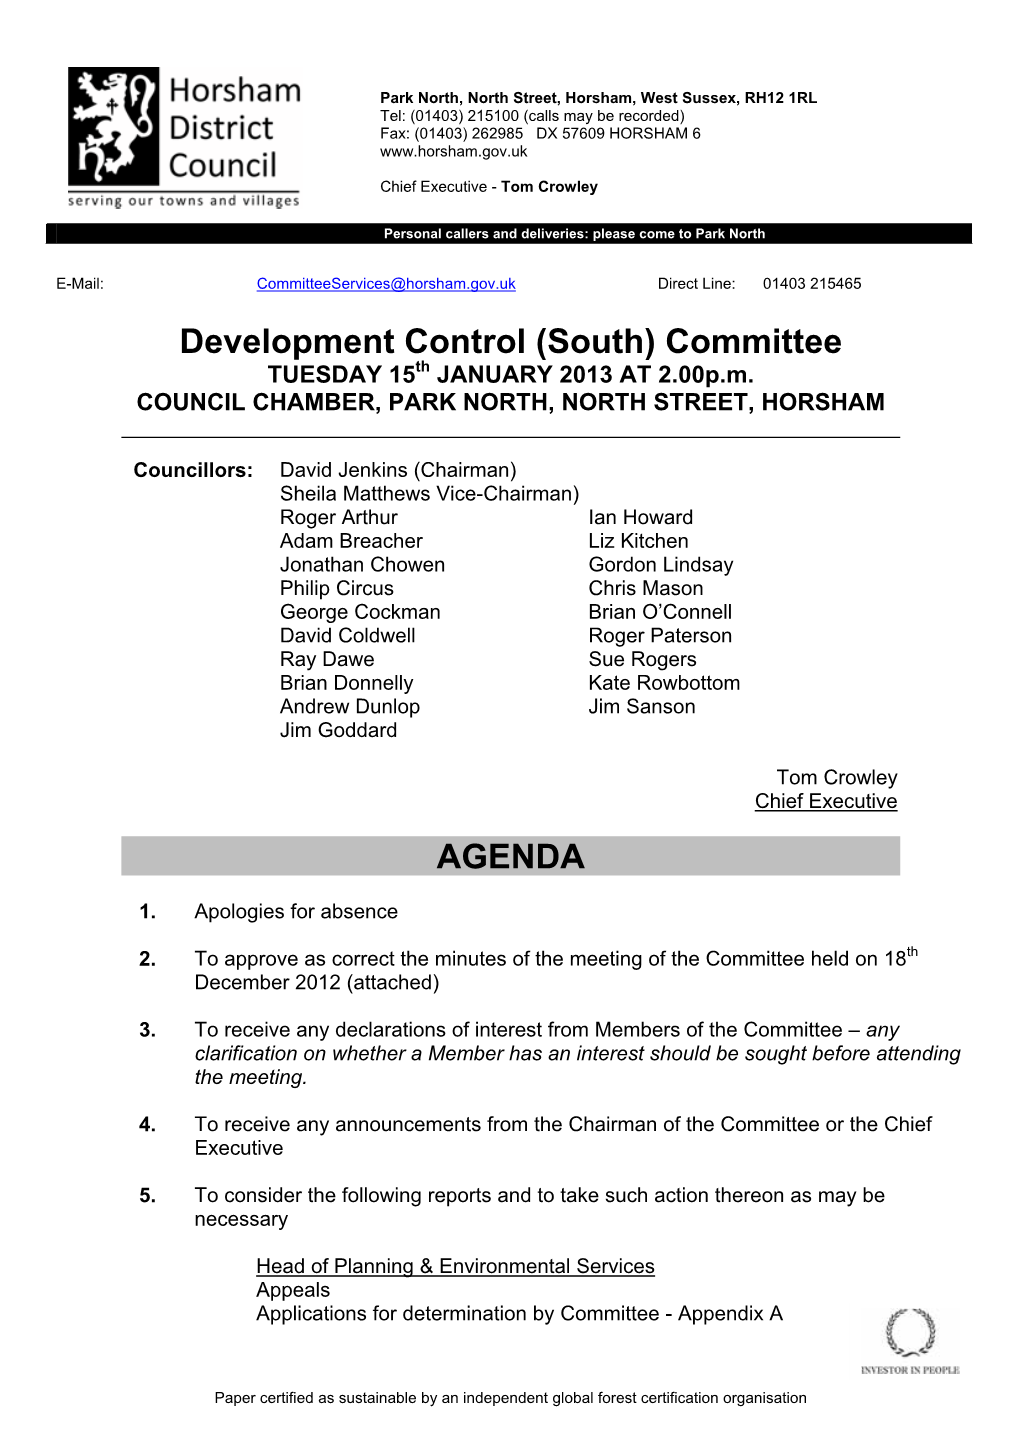 South) Committee TUESDAY 15Th JANUARY 2013 at 2.00P.M